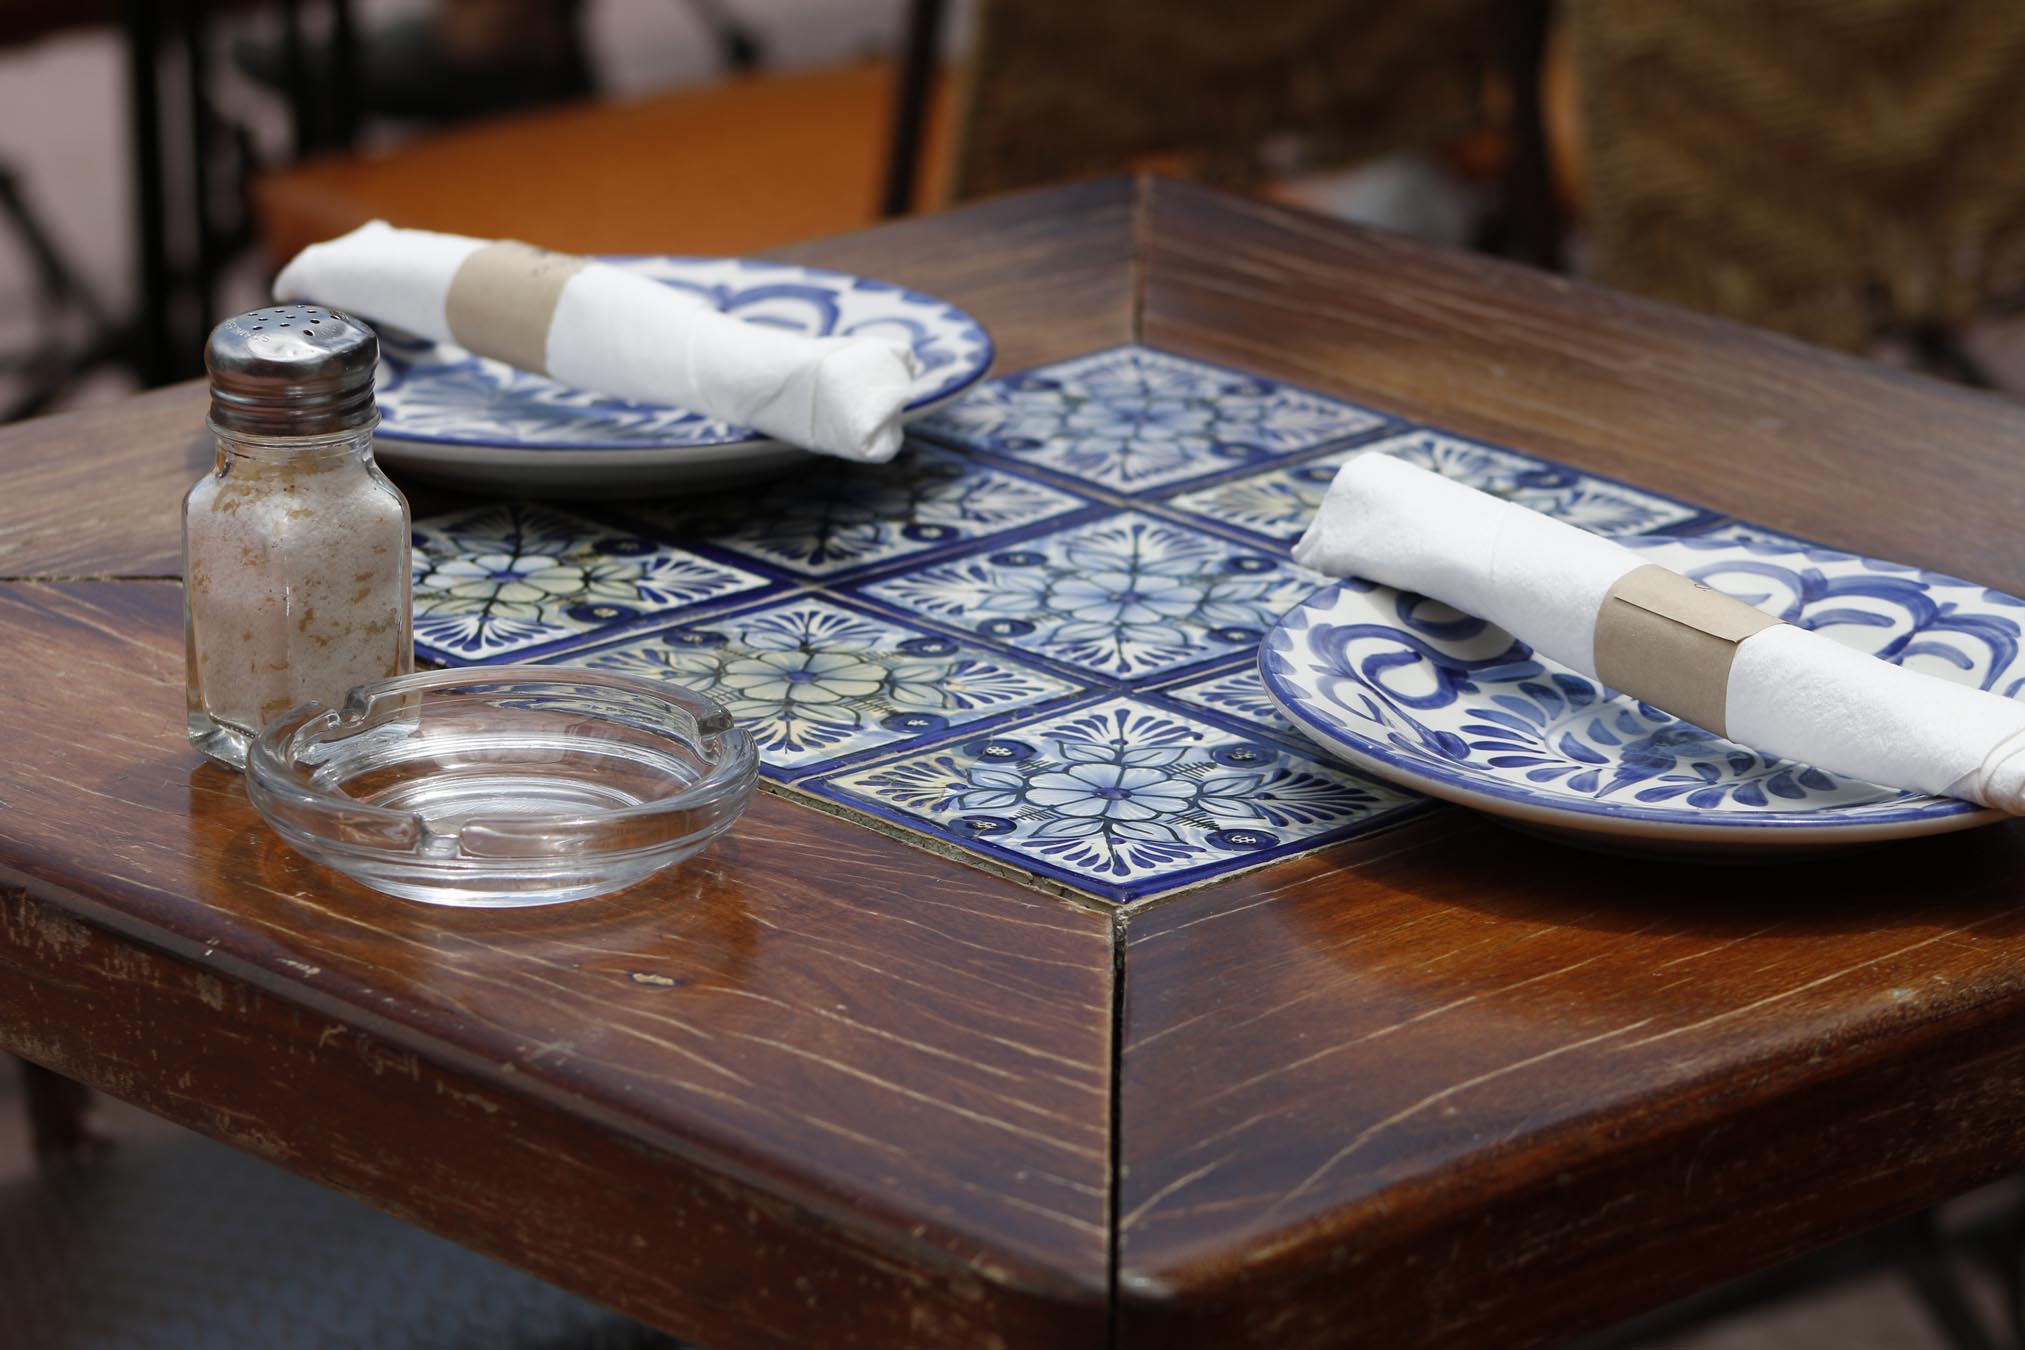 Table with blue tile